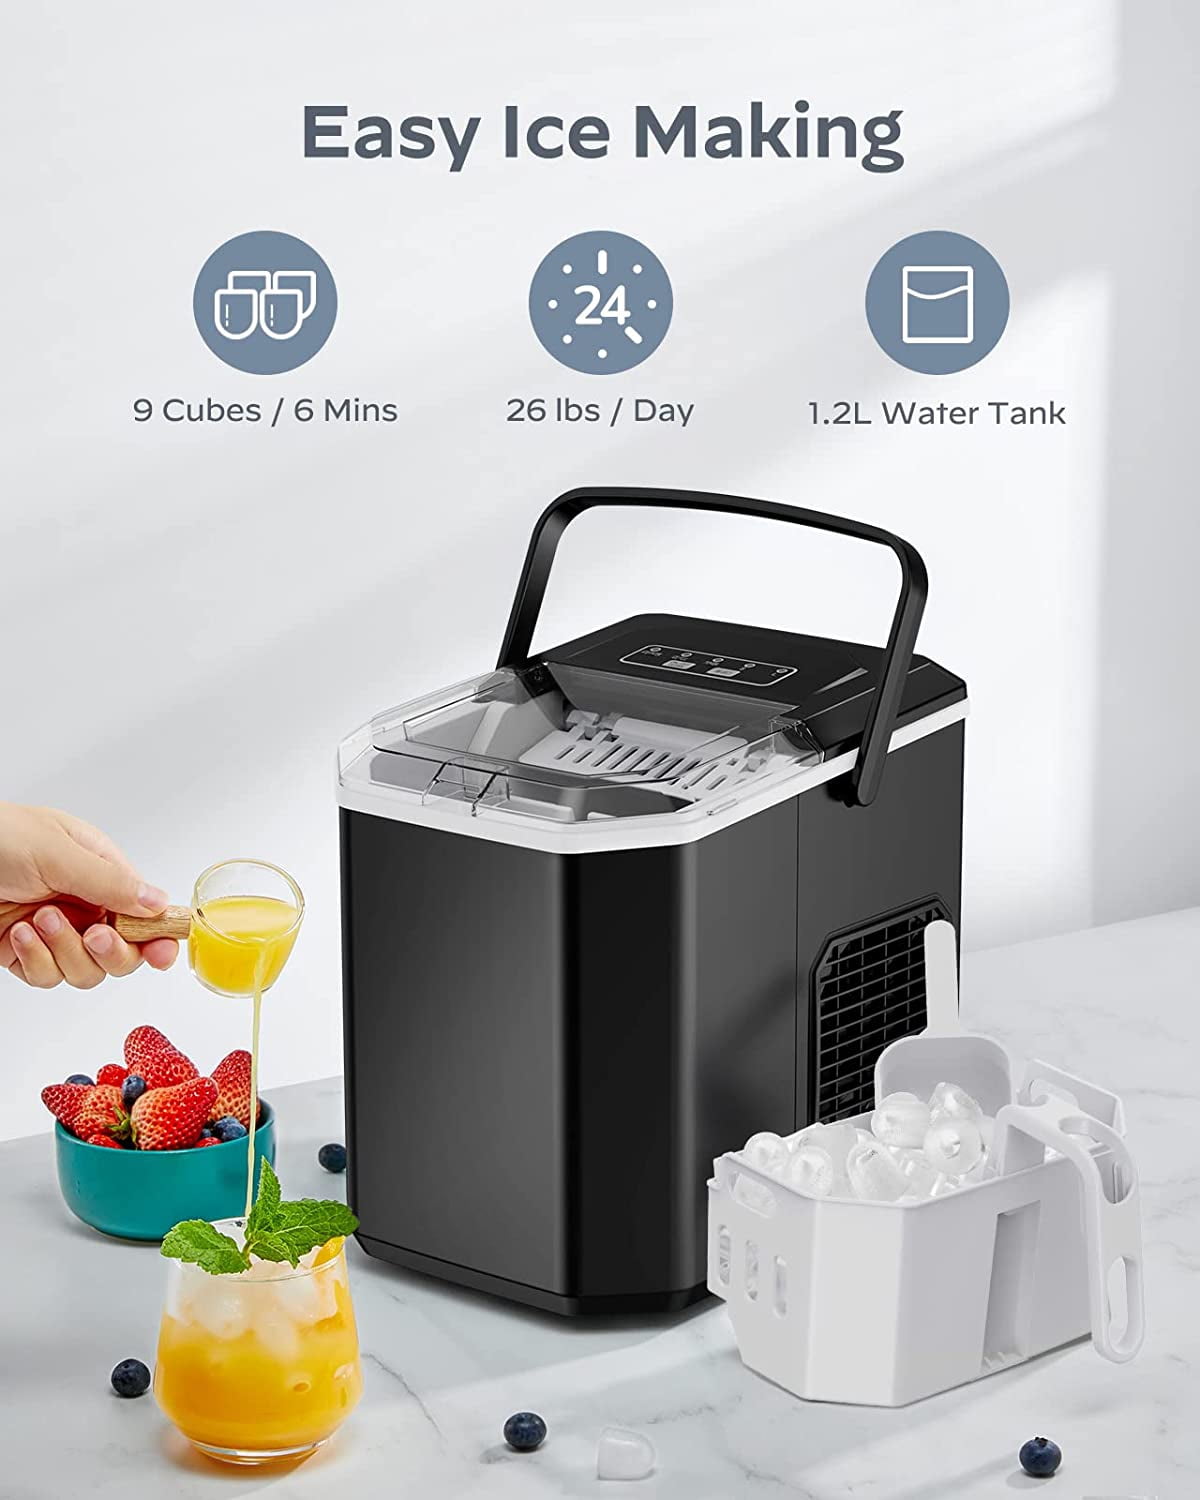 KISSAIR Portable Ice Maker Countertop, 9Pcs/8Mins, 26lbs/24H, Self-Cleaning  Ice Machine with Handle for Kitchen/Office/Bar/Party, Black 